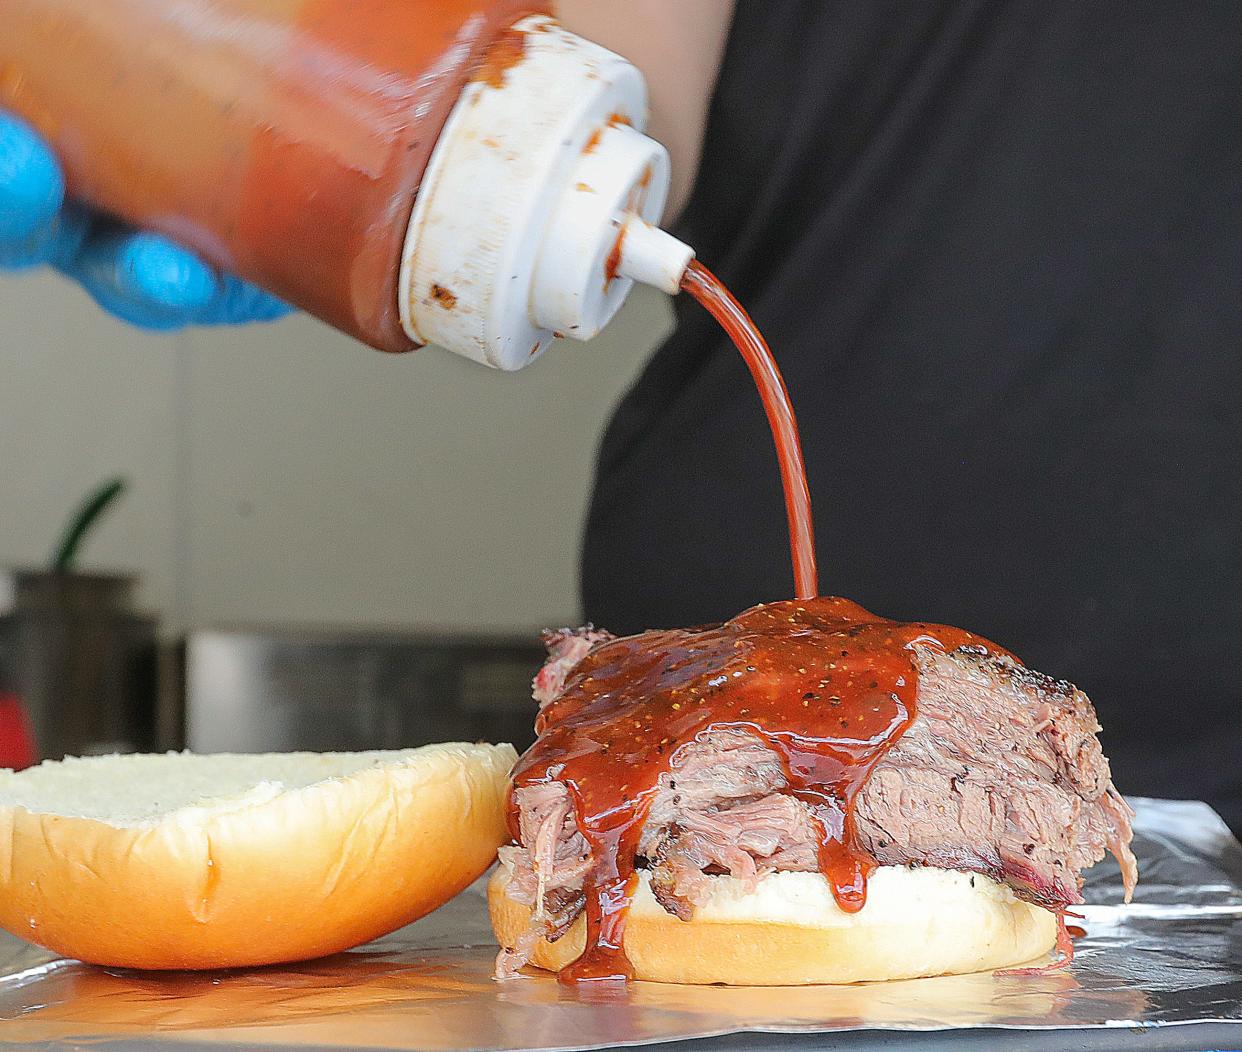 Joe Menendez, owner of Joe's Barbecue, slathers his famous sauce on a brisket sandwich at his temporarily location at the North Water Brewing Company in Kent.